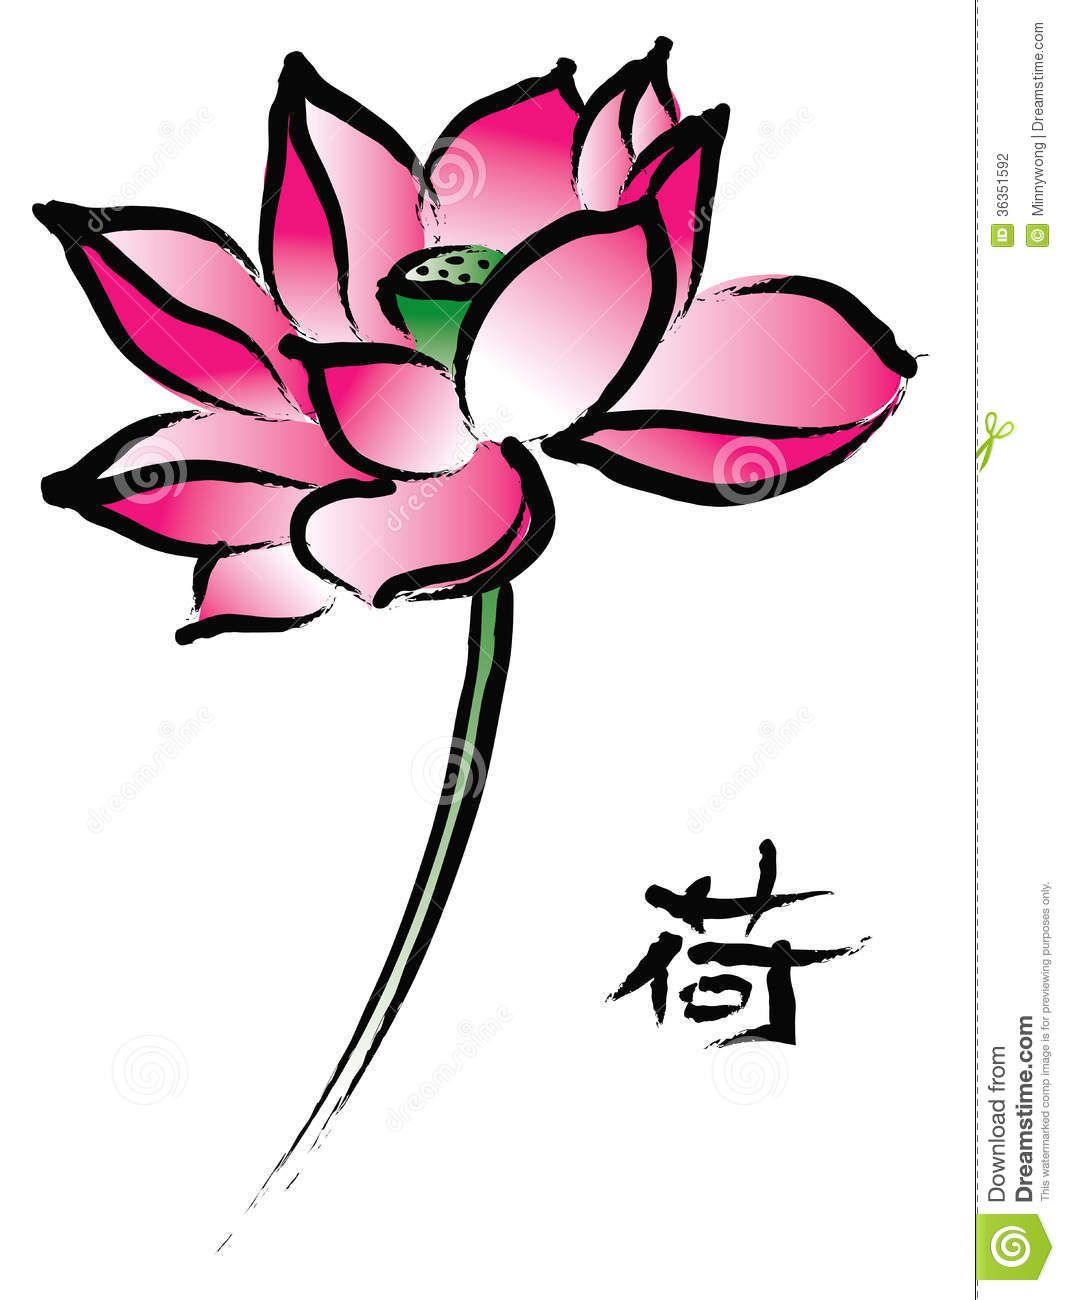 Lotus clipart lotus chinese. Red in painting style